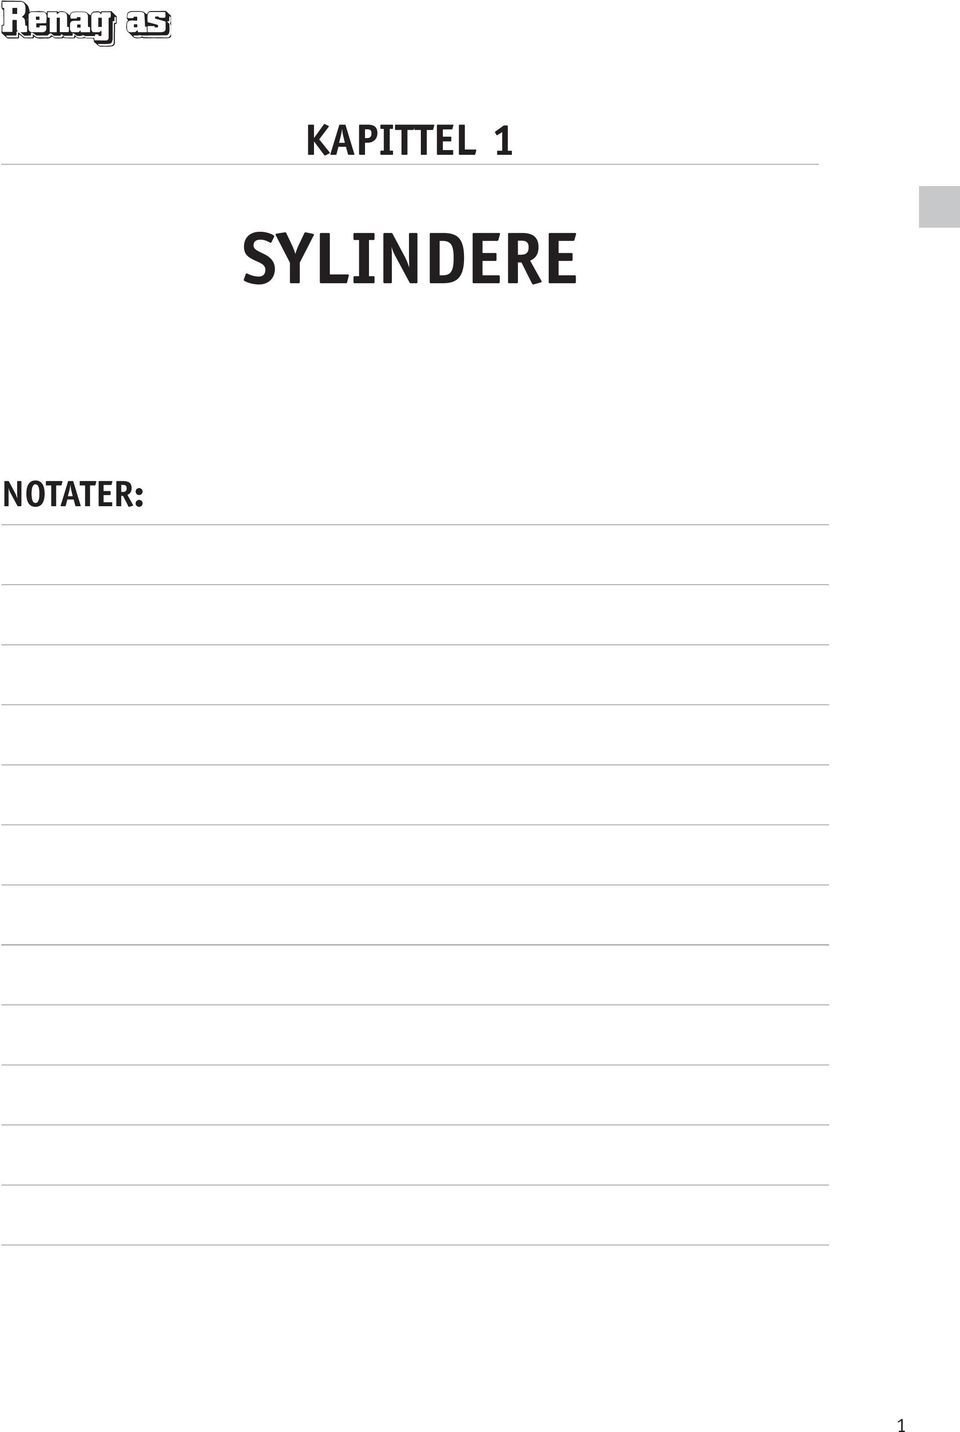 SYLINDERE